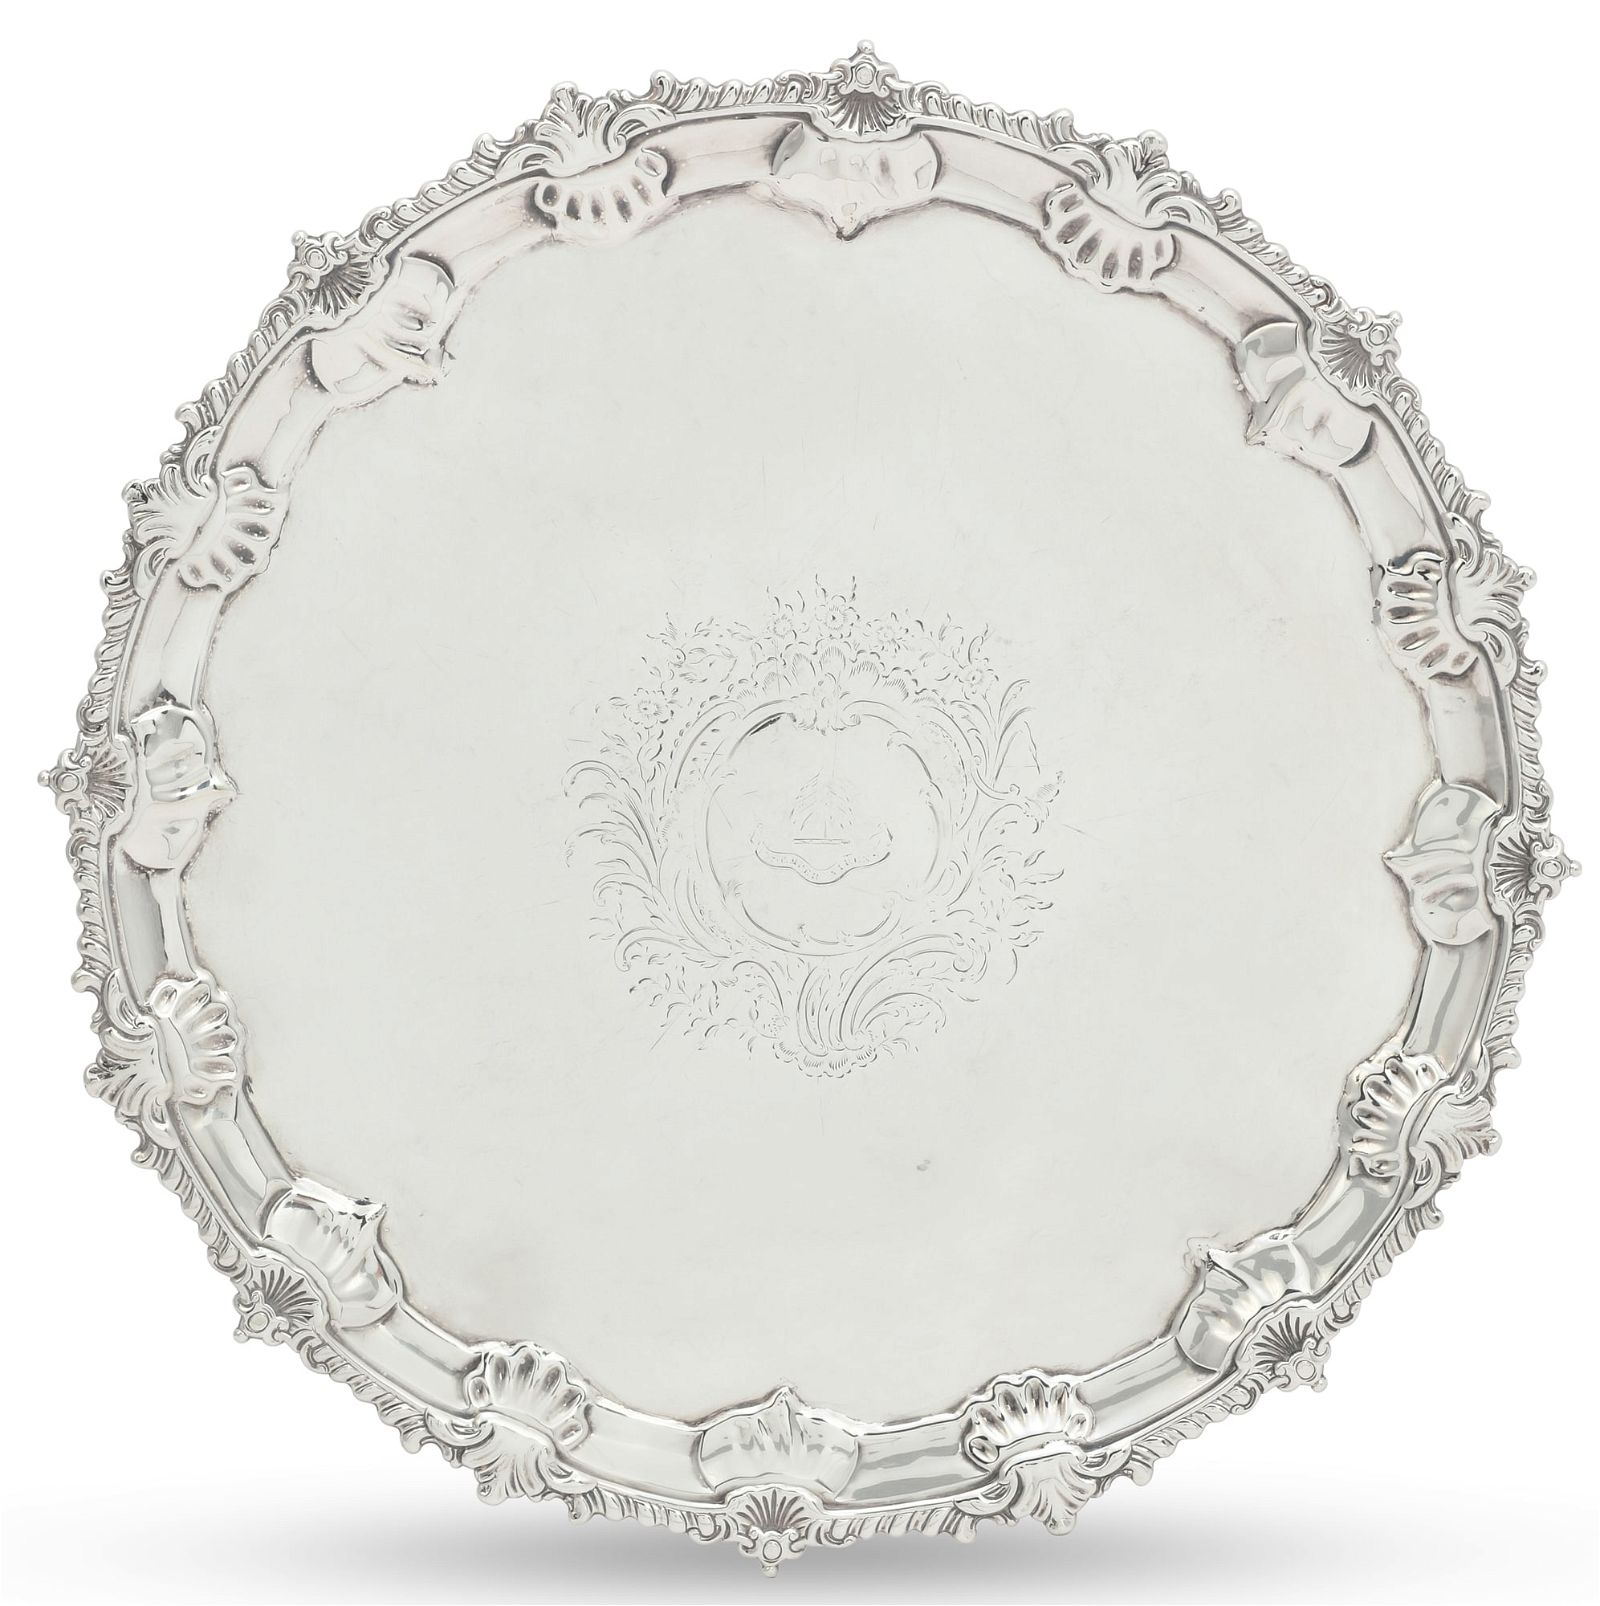 A GEORGE III SILVER FOOTED SALVER,